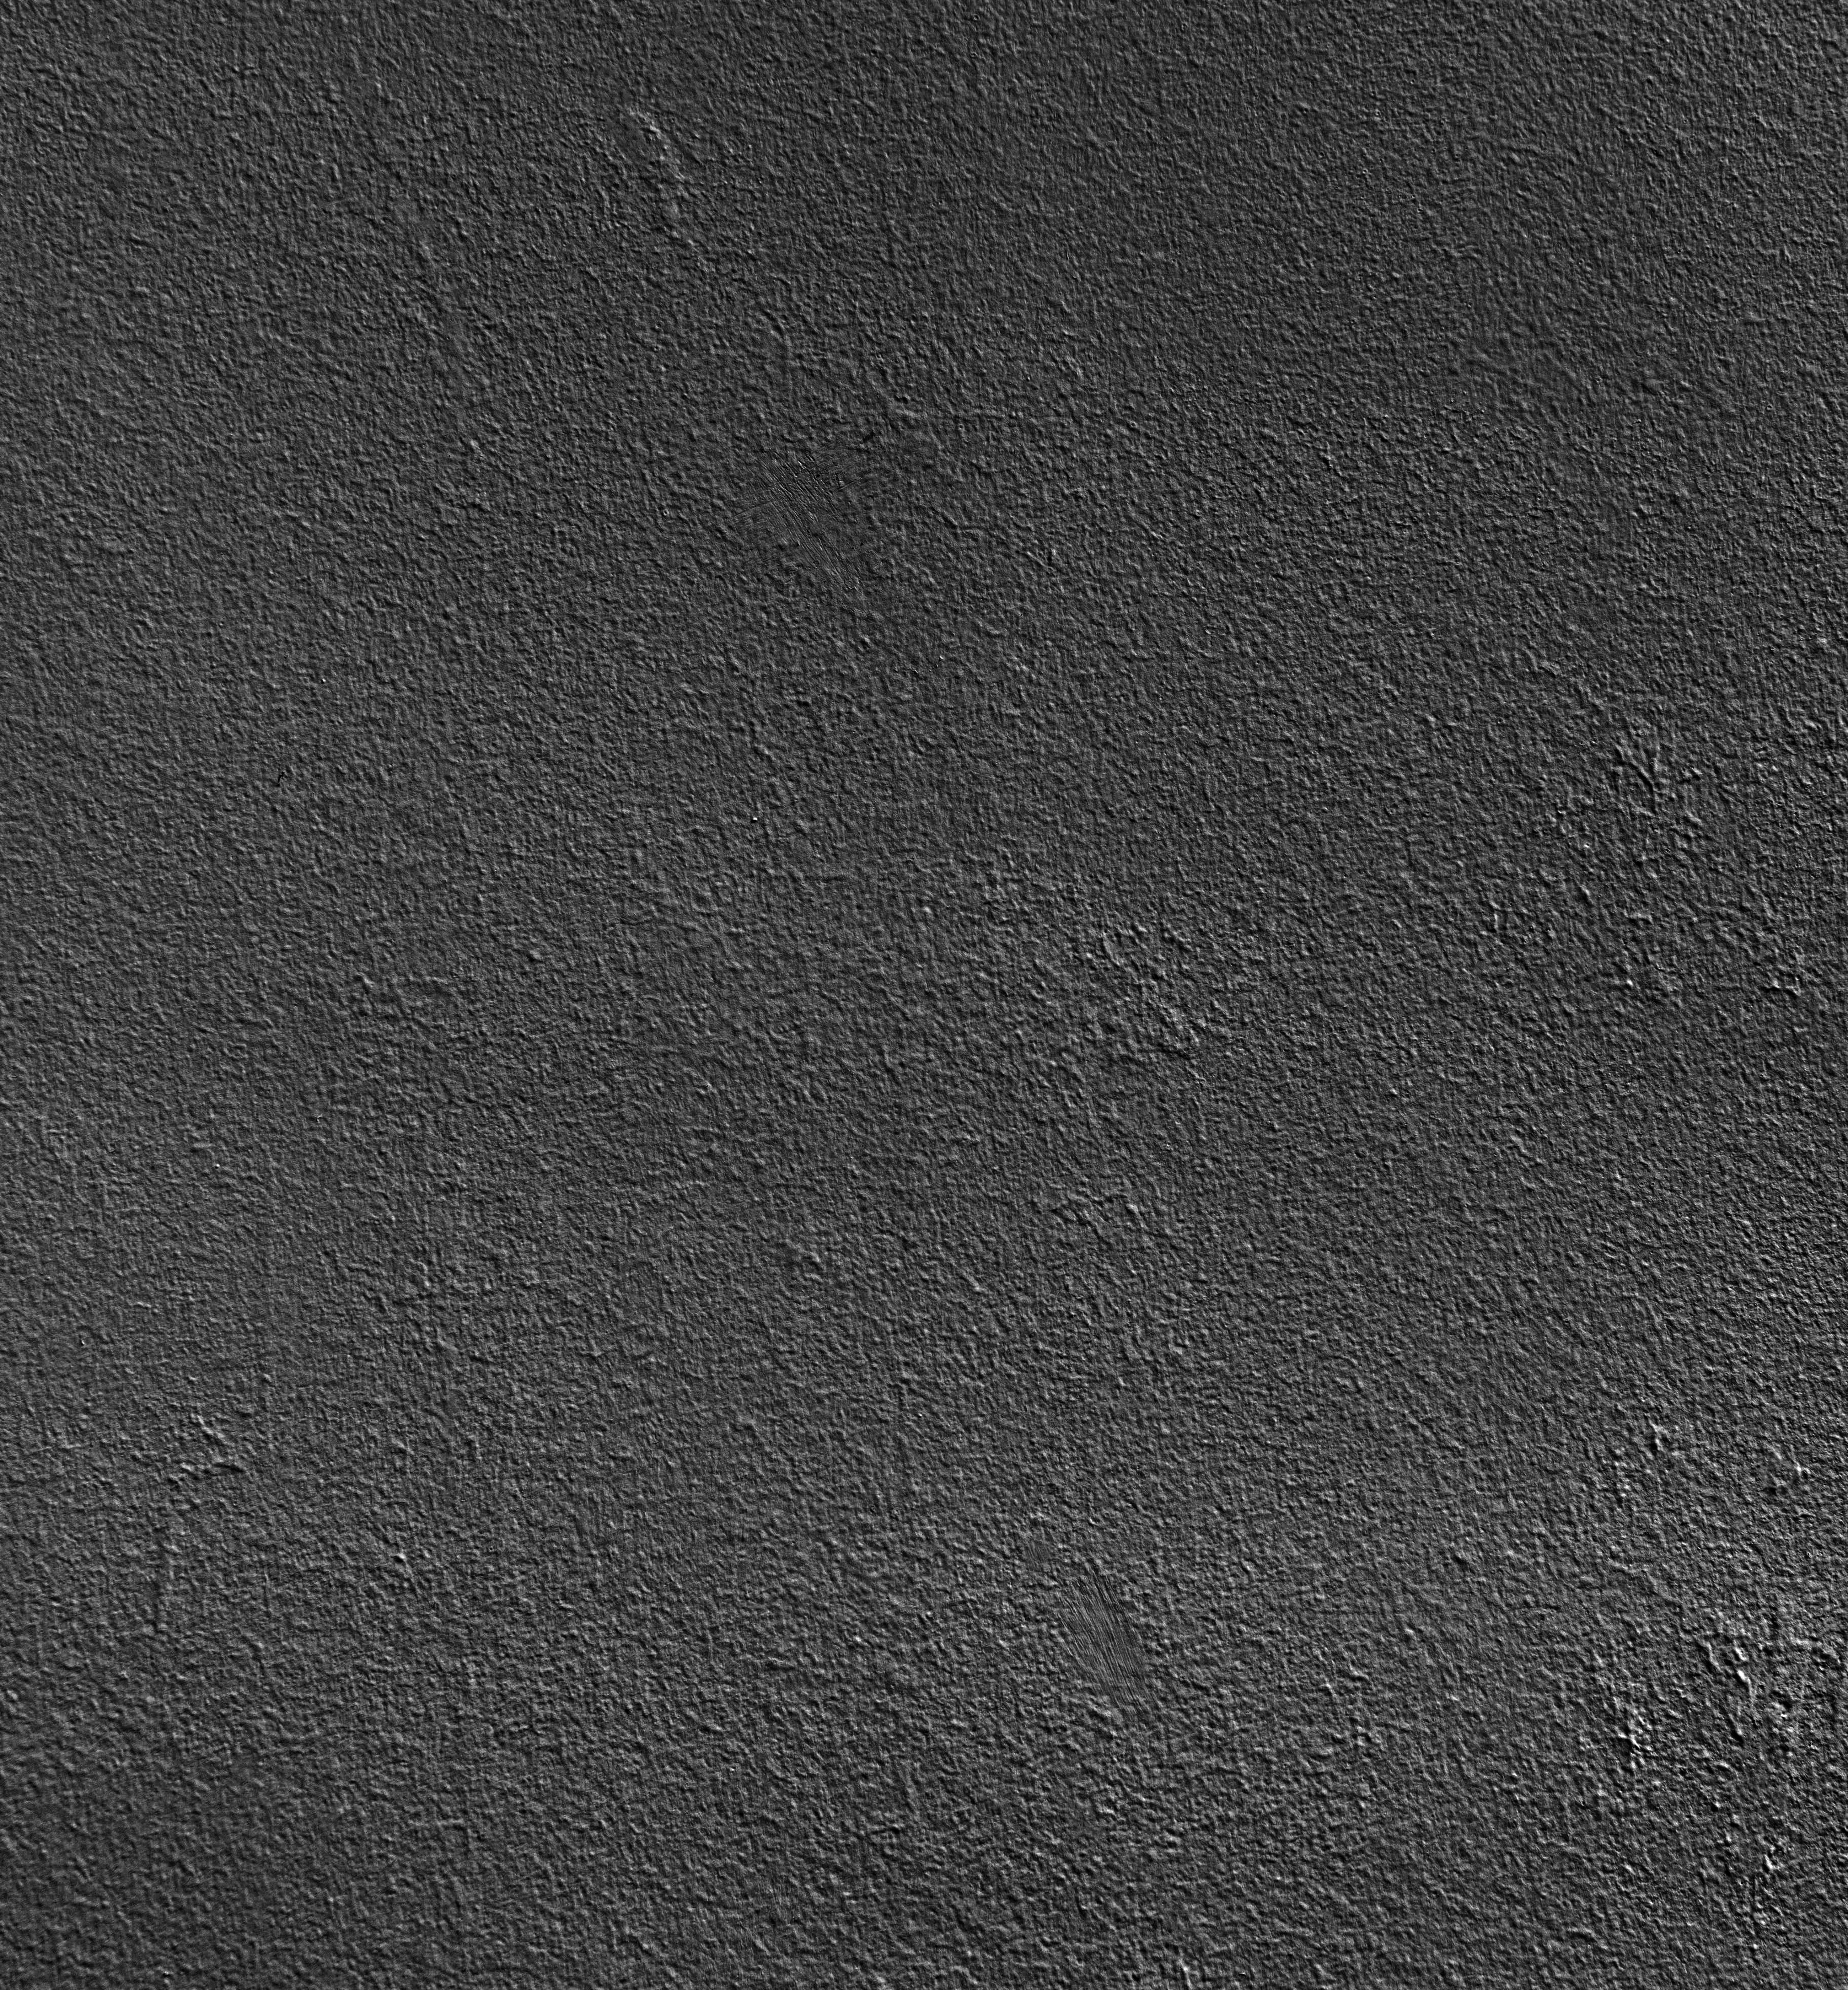 Smartphone Background textures, rough, rugged, grey